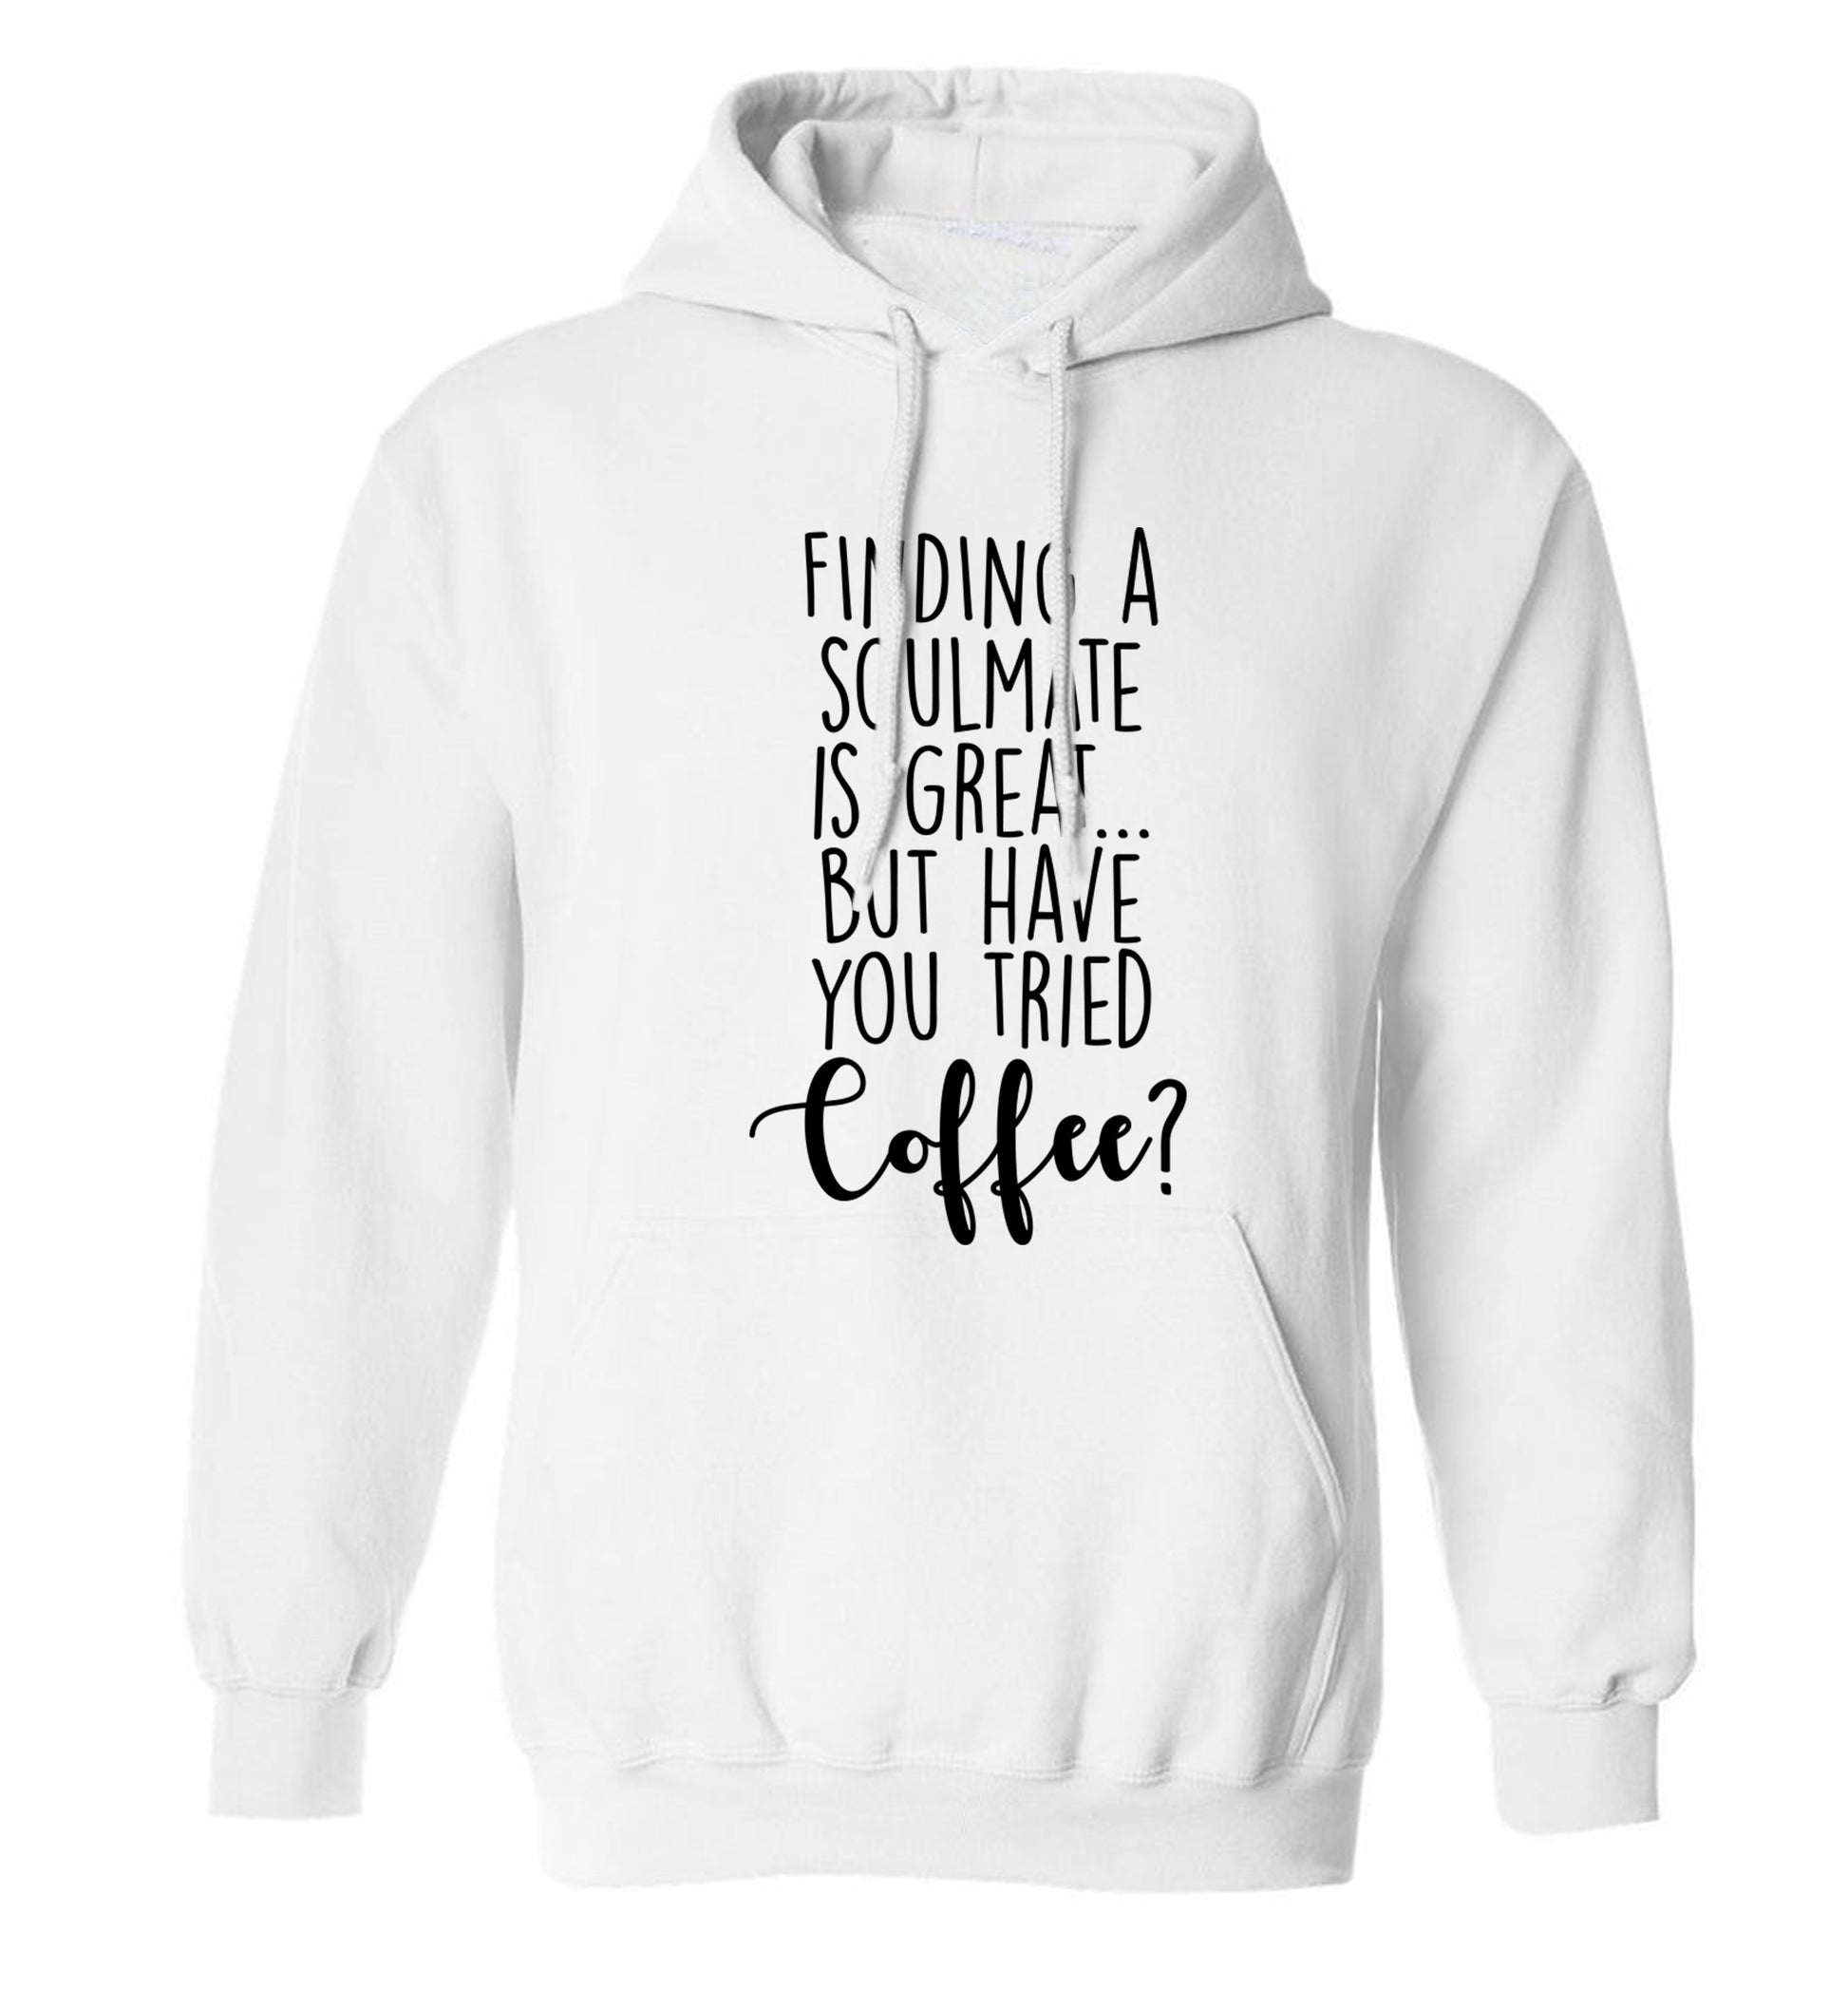 Finding a soulmate is great but have you tried coffee? adults unisex white hoodie 2XL